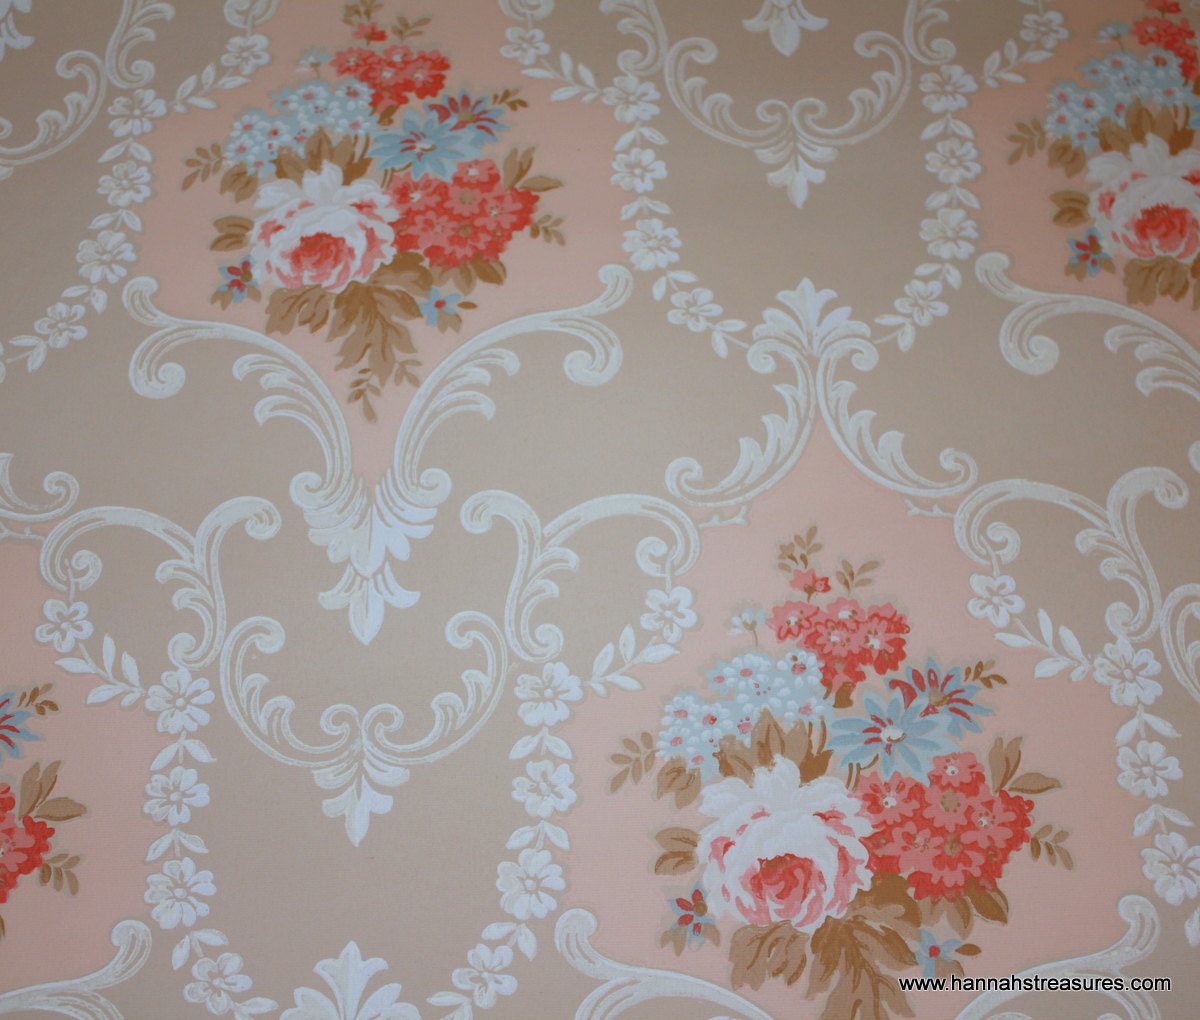 1940s Vintage Wallpaper Cabbage Rose Floral by HannahsTreasures